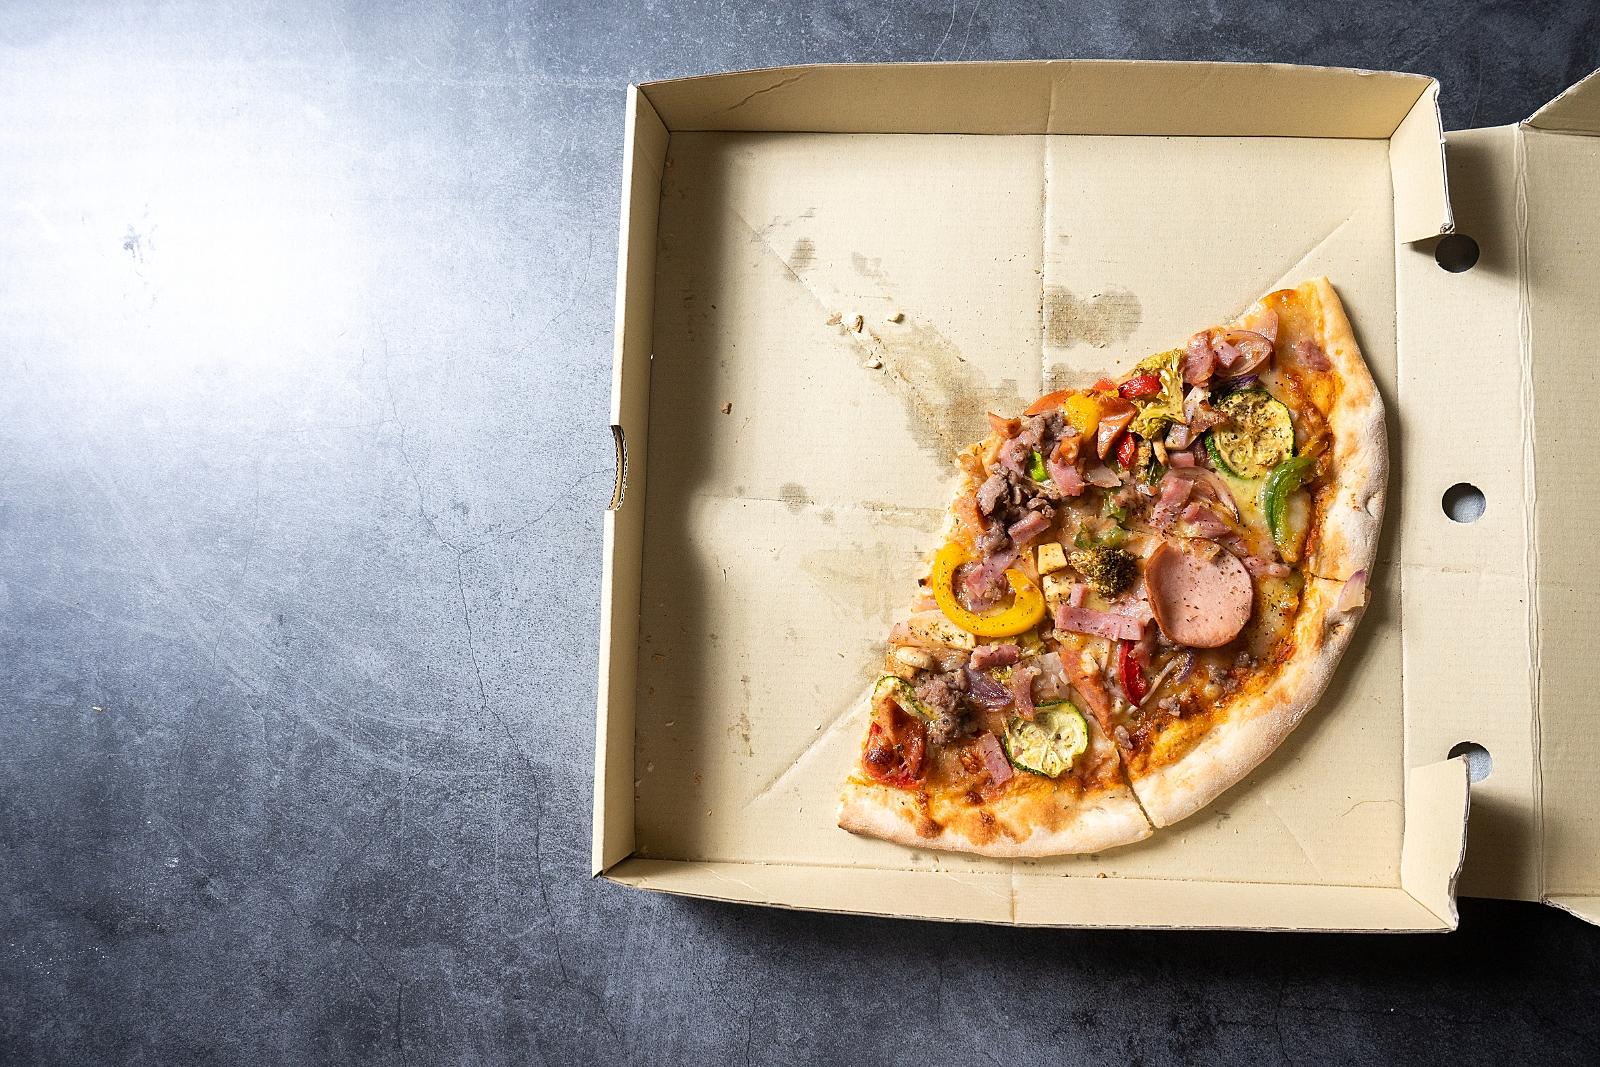 Turns Out Louis Vuitton's 'Pizza Box' Is Not Actually for Pizza